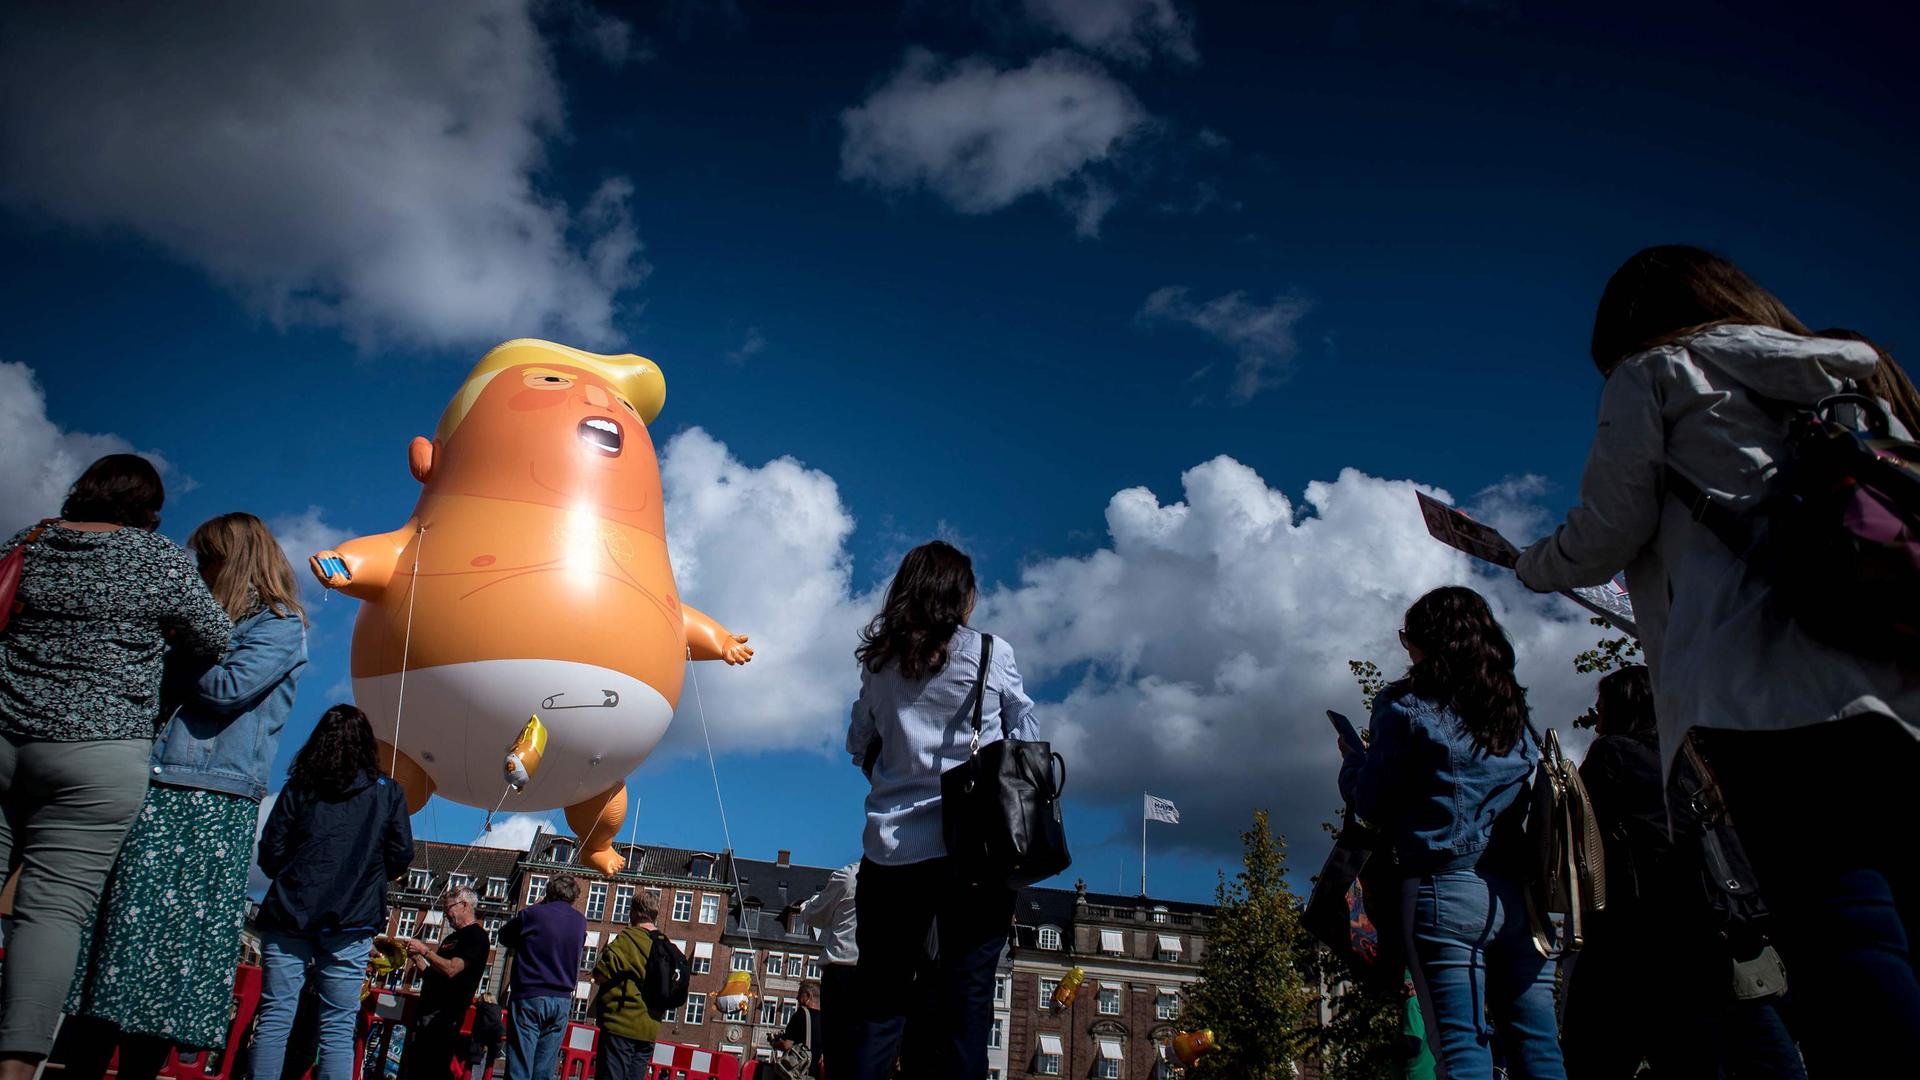 Demonstrators protest with an inflated Baby-Trump balloon at Kongens Nytorv in Copenhagen, Denmark, on September 2, 2019. - Though US President Donald Trump had canceled the state visit to Denmark scheduled for September 2 and 3, 2019, demonstrators carried out their planned protests. (Photo by Mads Claus Rasmussen / Ritzau Scanpix / AFP) / Denmark OUT